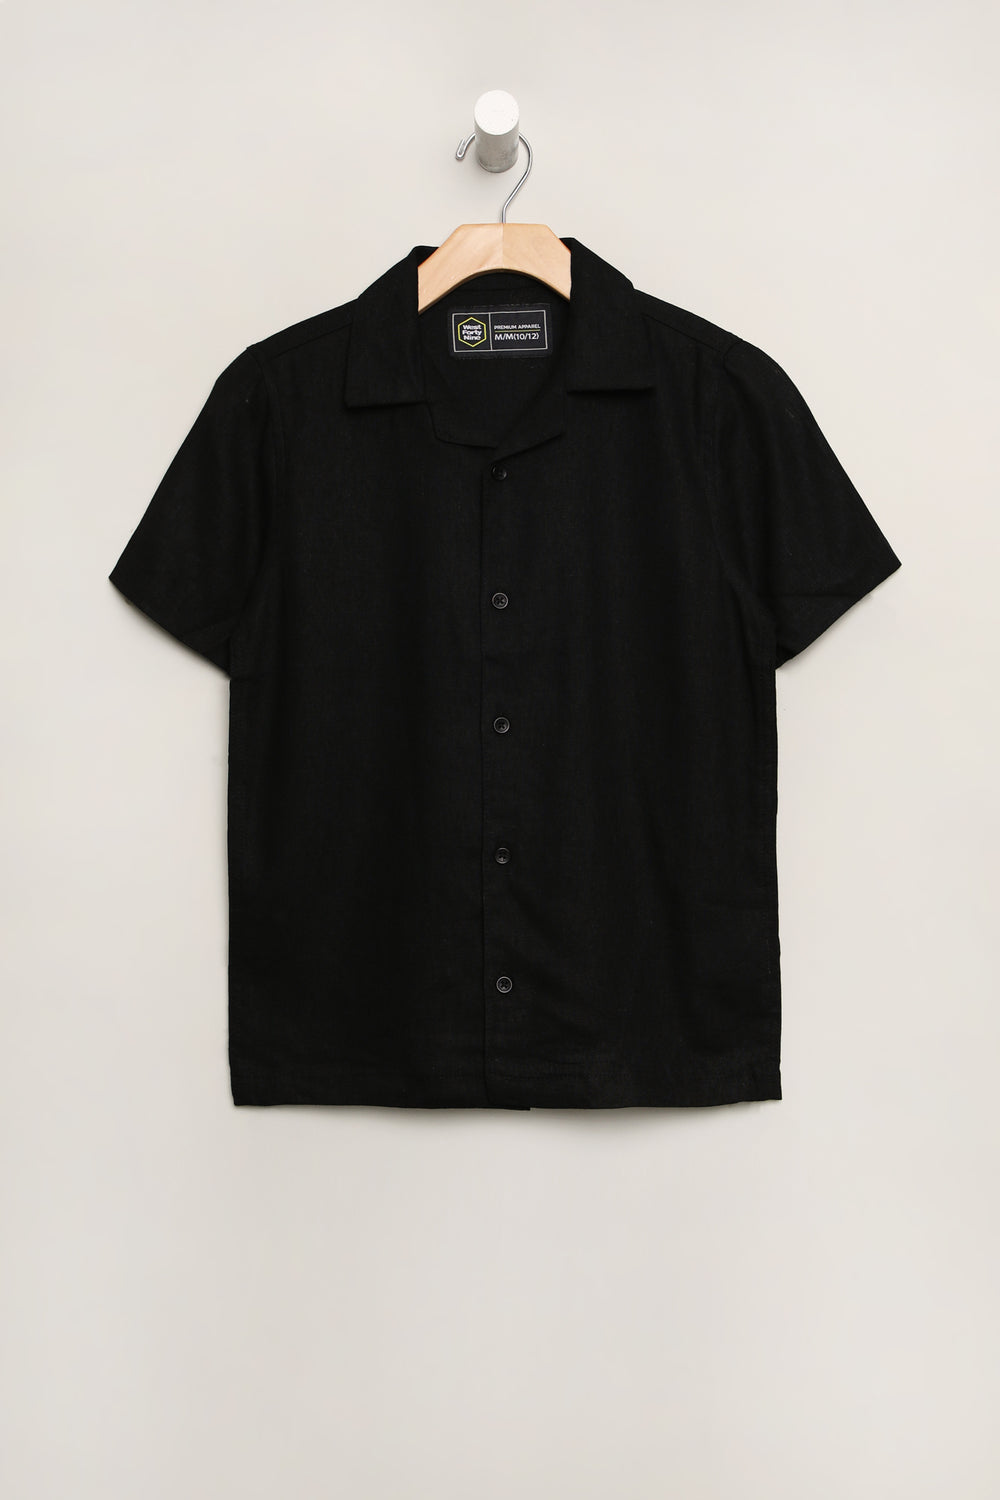 West49 Youth Linen Button-Up West49 Youth Linen Button-Up